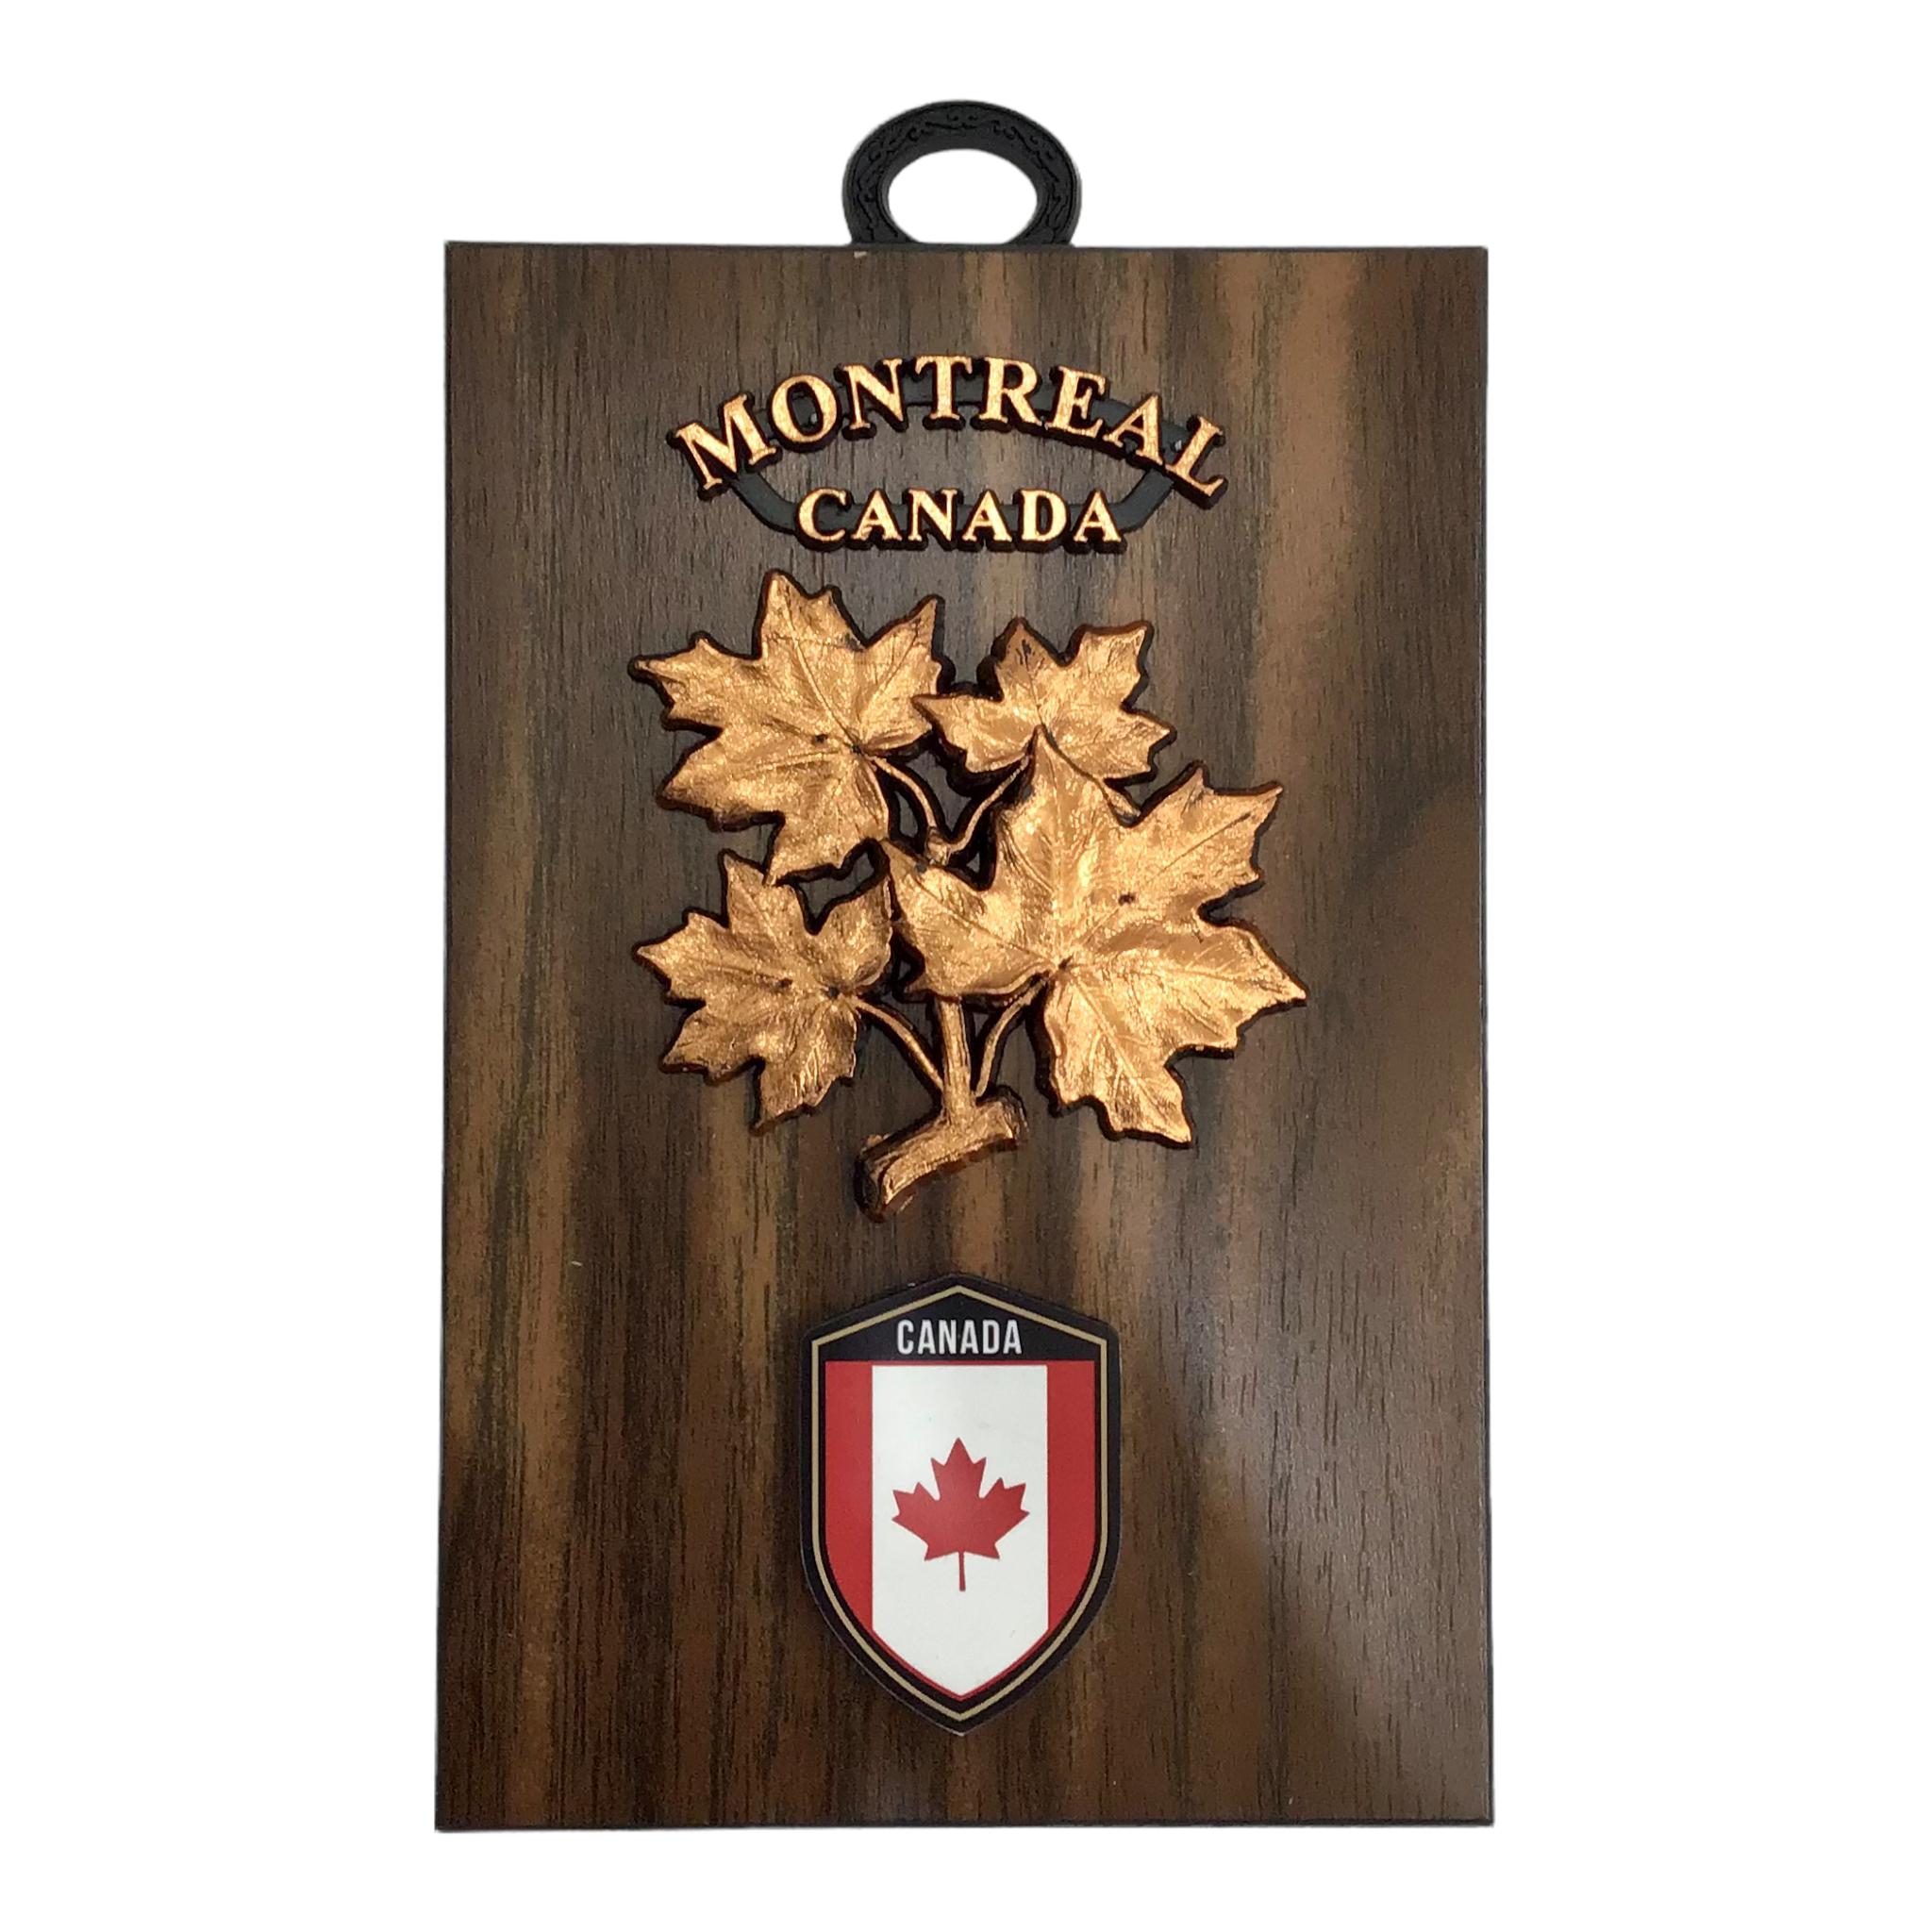 Canadian Maple Leaves Souvenir Wooden Wall Plaque Canada National Flag Figurine on Hickory 4”x6”